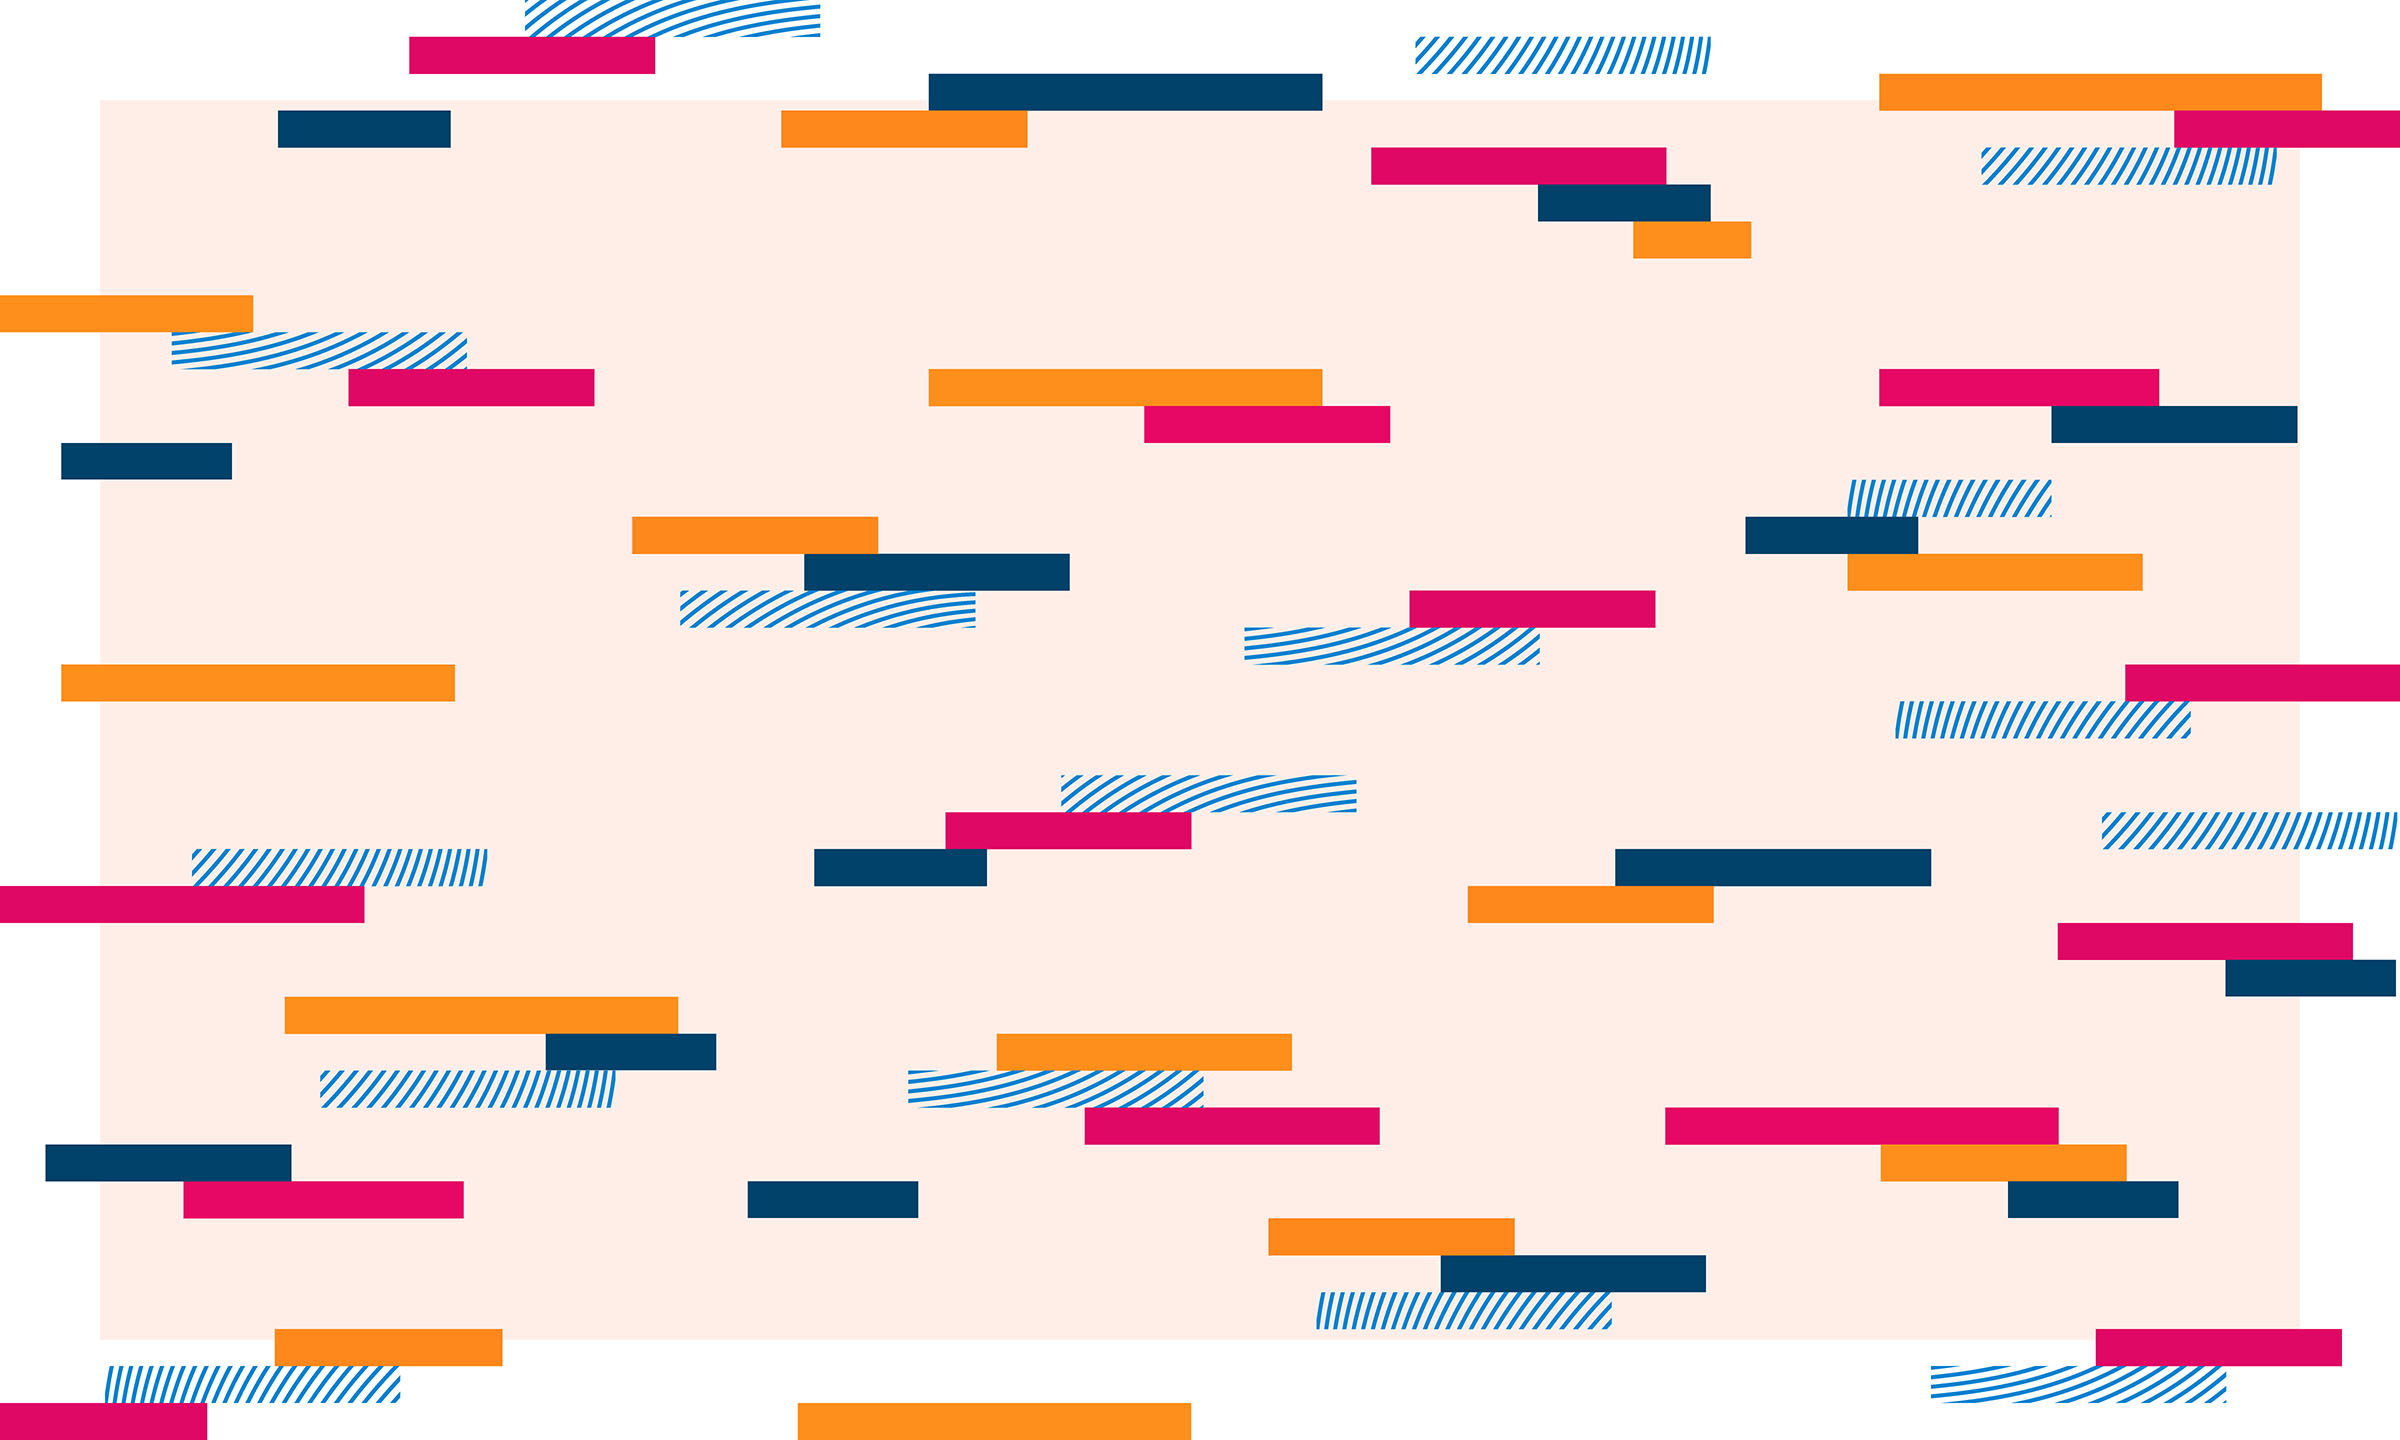 Abstract background with a pastel pink background with blue, orange, and pink stripes and rectangles.